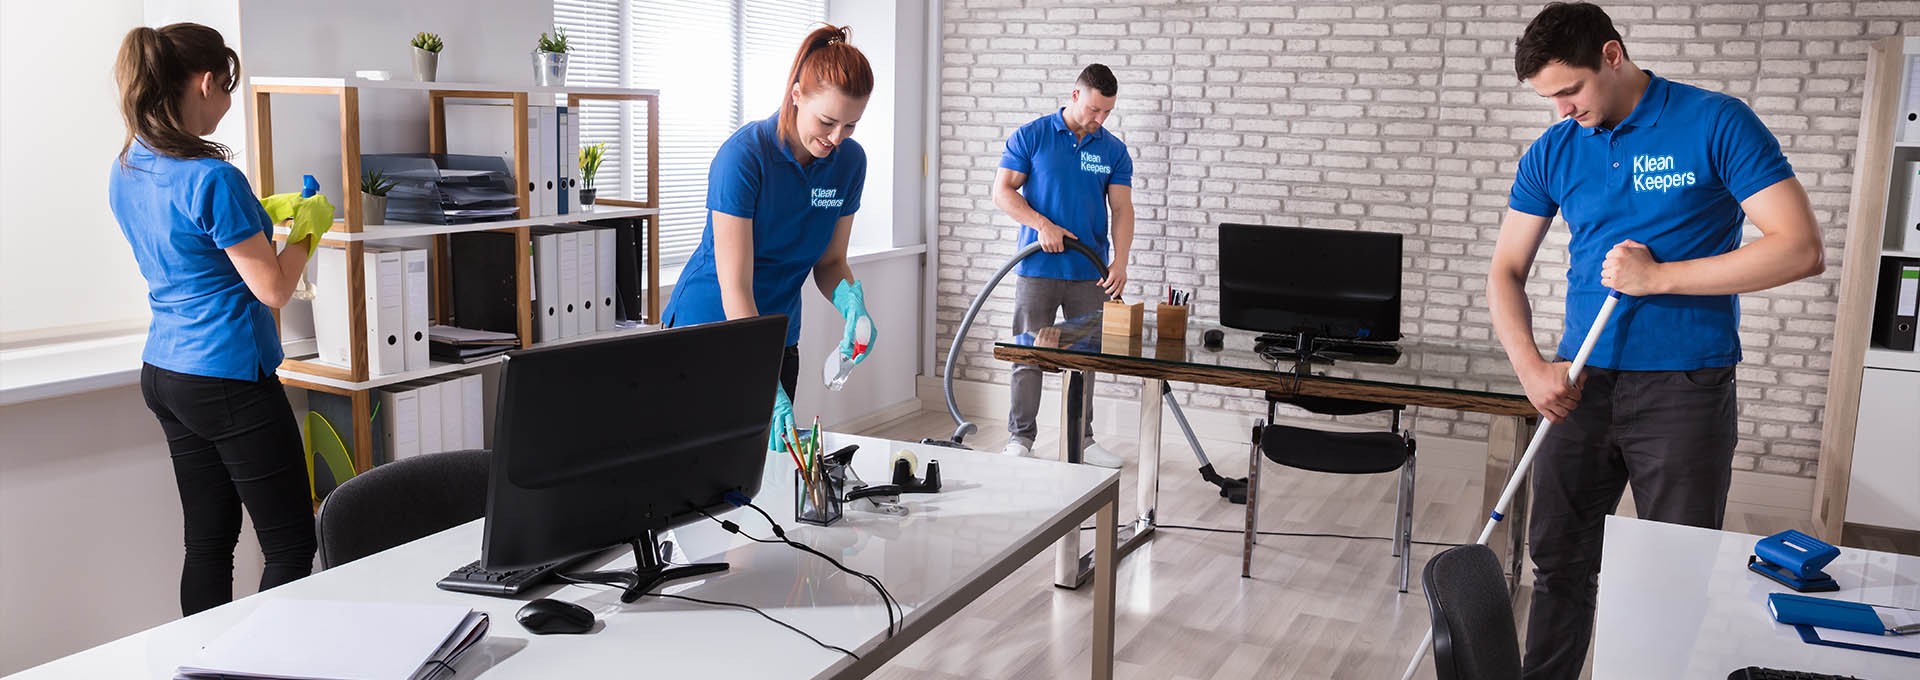 COMMERCIAL CLEANING SERVICES IN LONDON – KLEAN KEEPERS